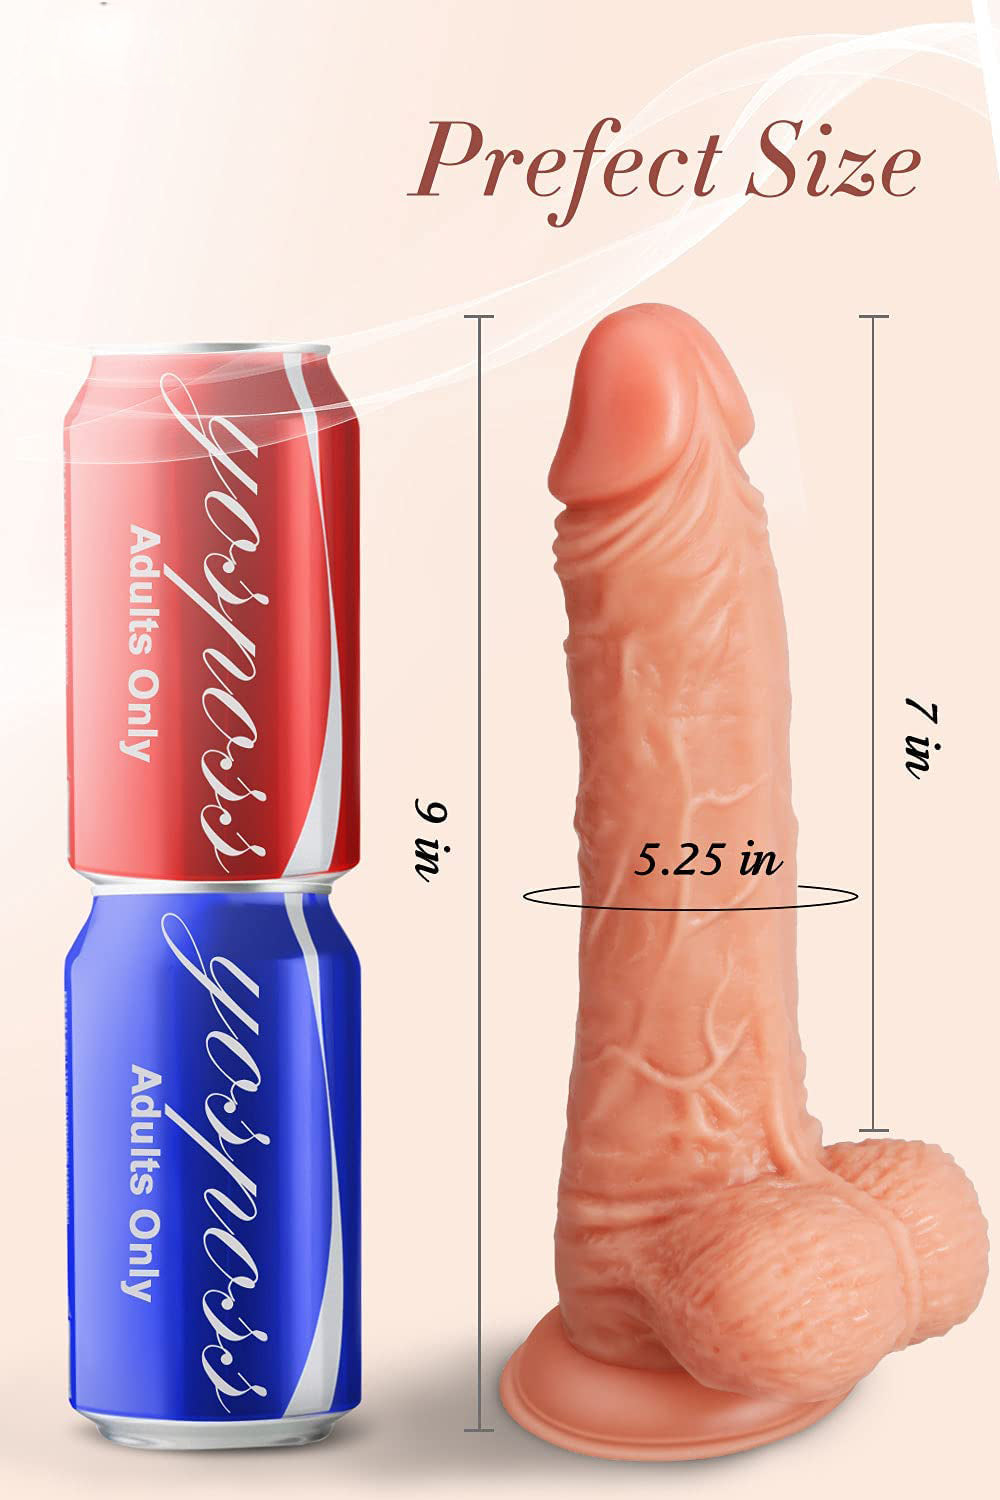 9 Inch Realistic Dildo, Body-Safe Material Lifelike Huge Penis with Strong Suction Cup for Hands-free Play, Flexible Cock with Curved Shaft and Balls for Vaginal G-spot and Anal Play